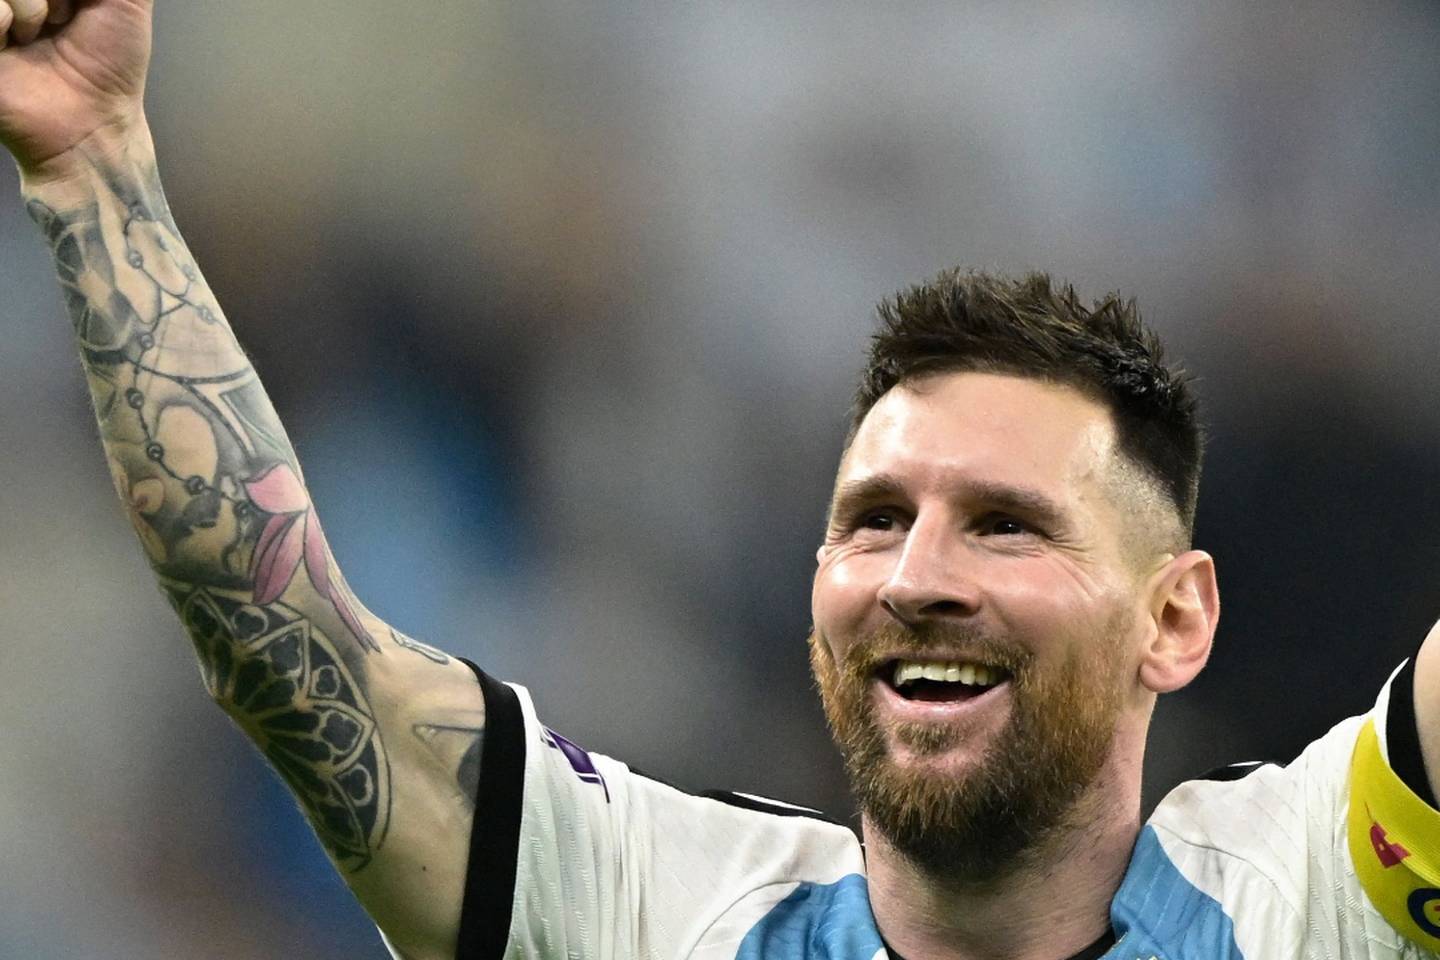 Emotional Video Shows the Incredible Amount of Respect Messi and